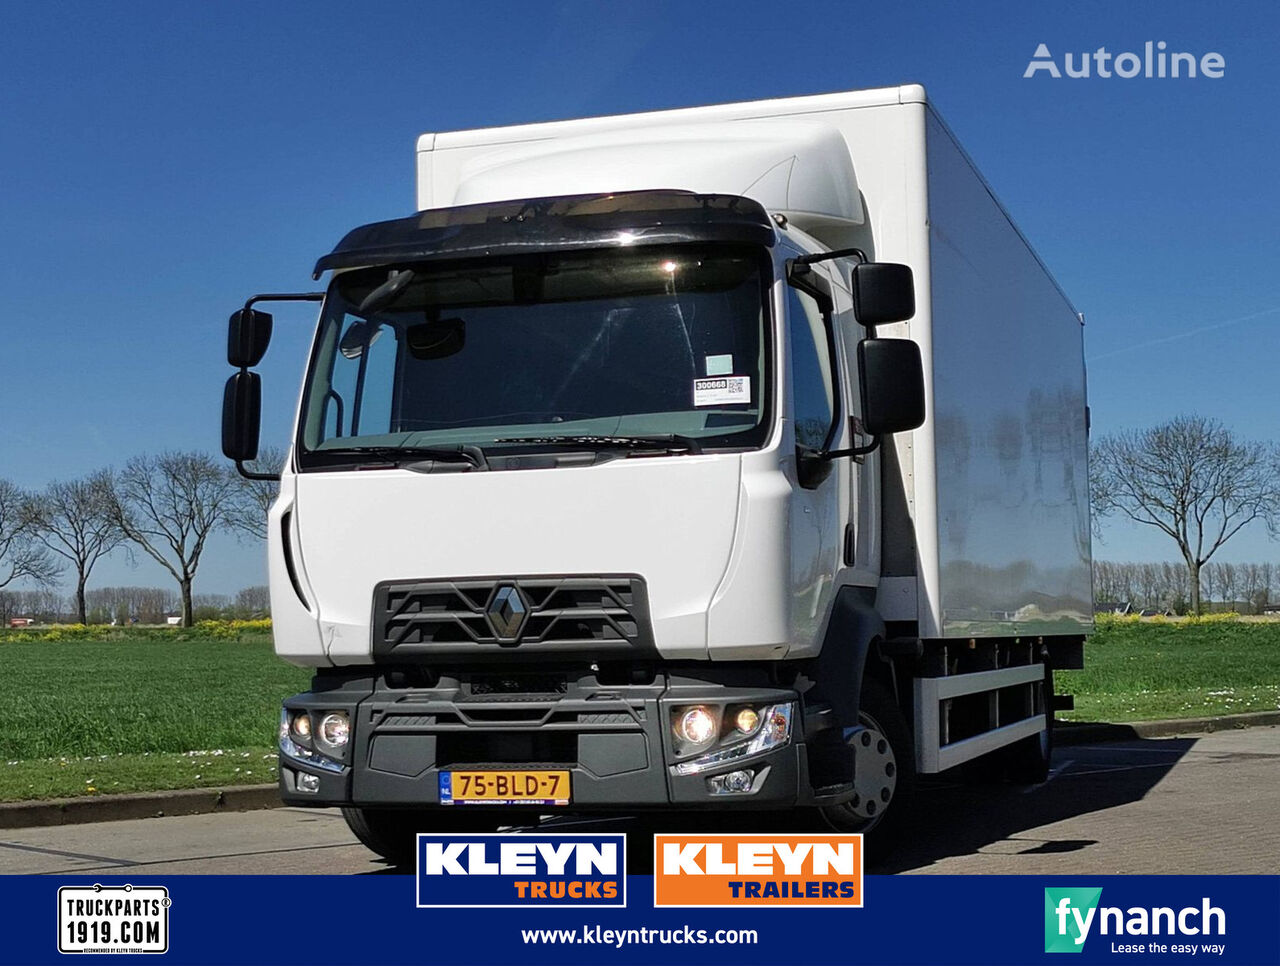 camion fourgon Renault D 220 11.9t airco taillift